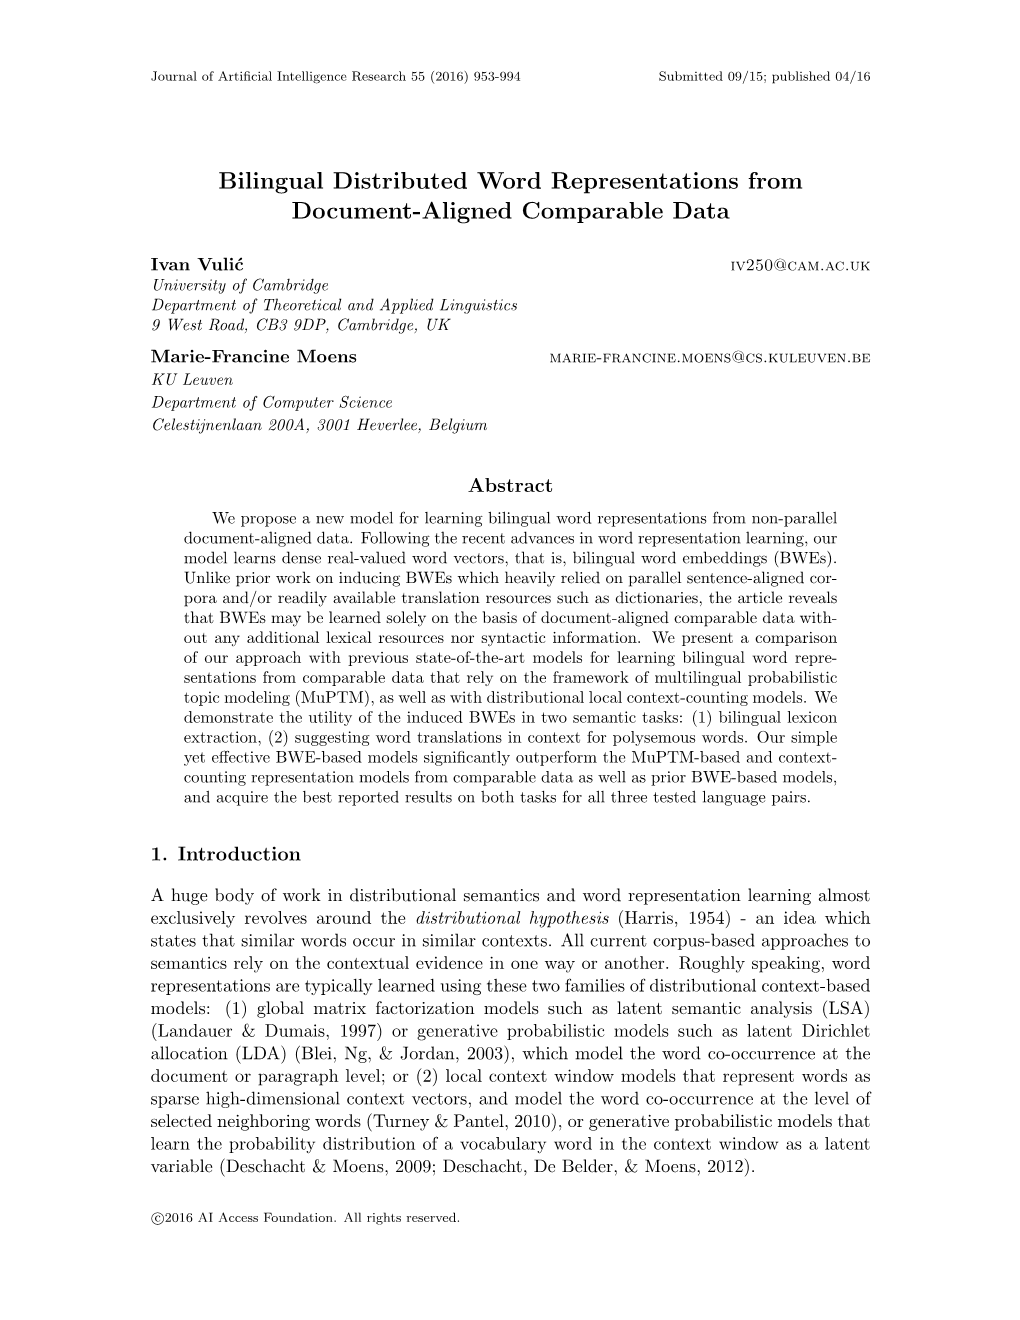 Bilingual Distributed Word Representations from Document-Aligned Comparable Data